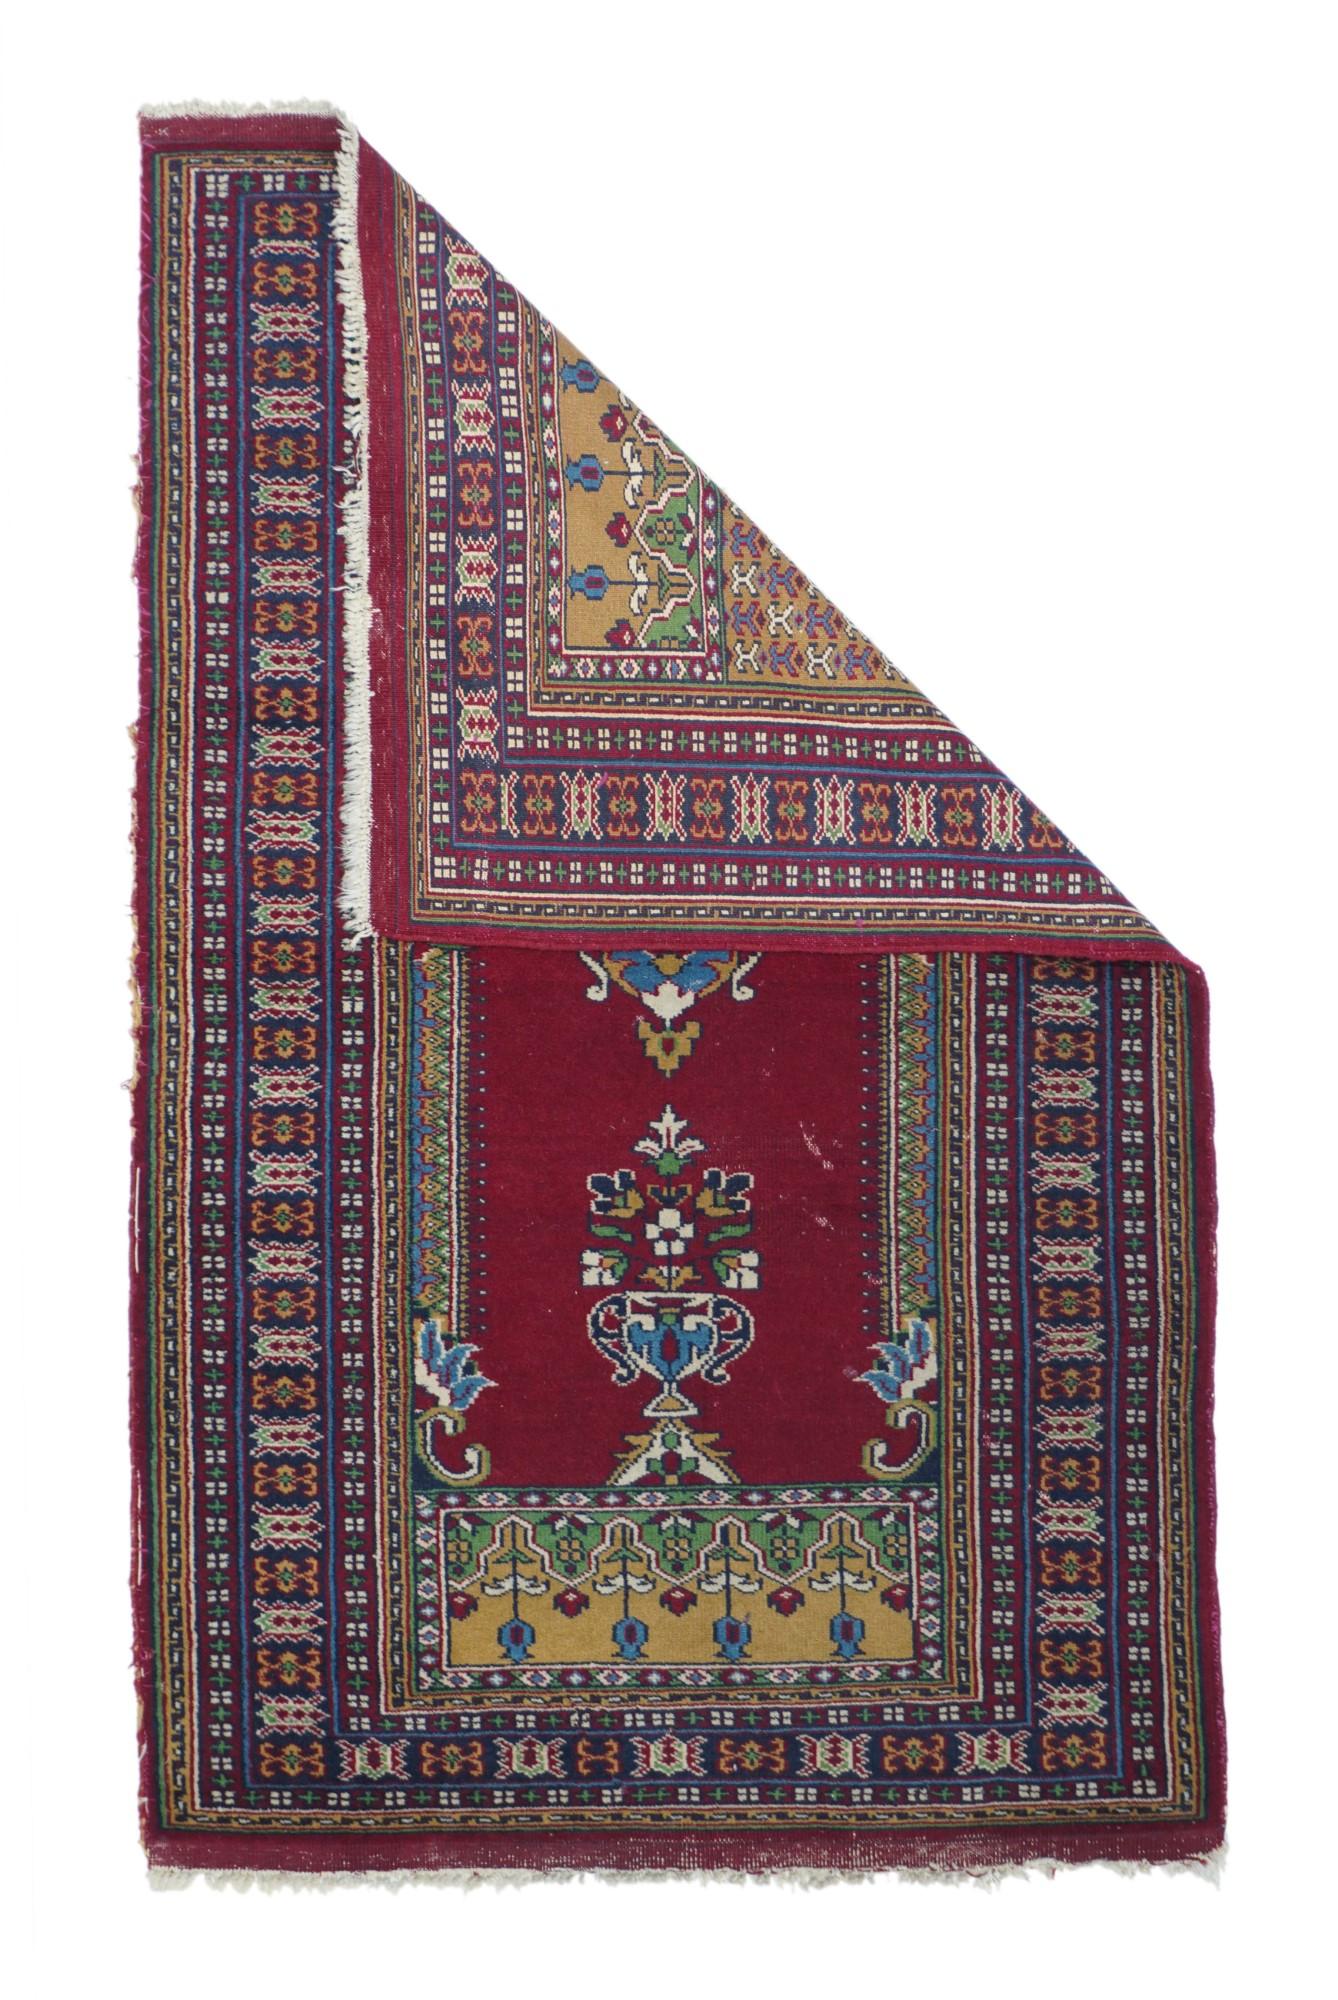 Bokhara Rug 2'7'' x 4'3''. In a general Ghiordes Turkish style with a red lobed niche supported by side colonettes, suspending a mosque lamp from the apex and centred by a flower-filled vase beneath. Deep spandrel section with humanoid X pattern.